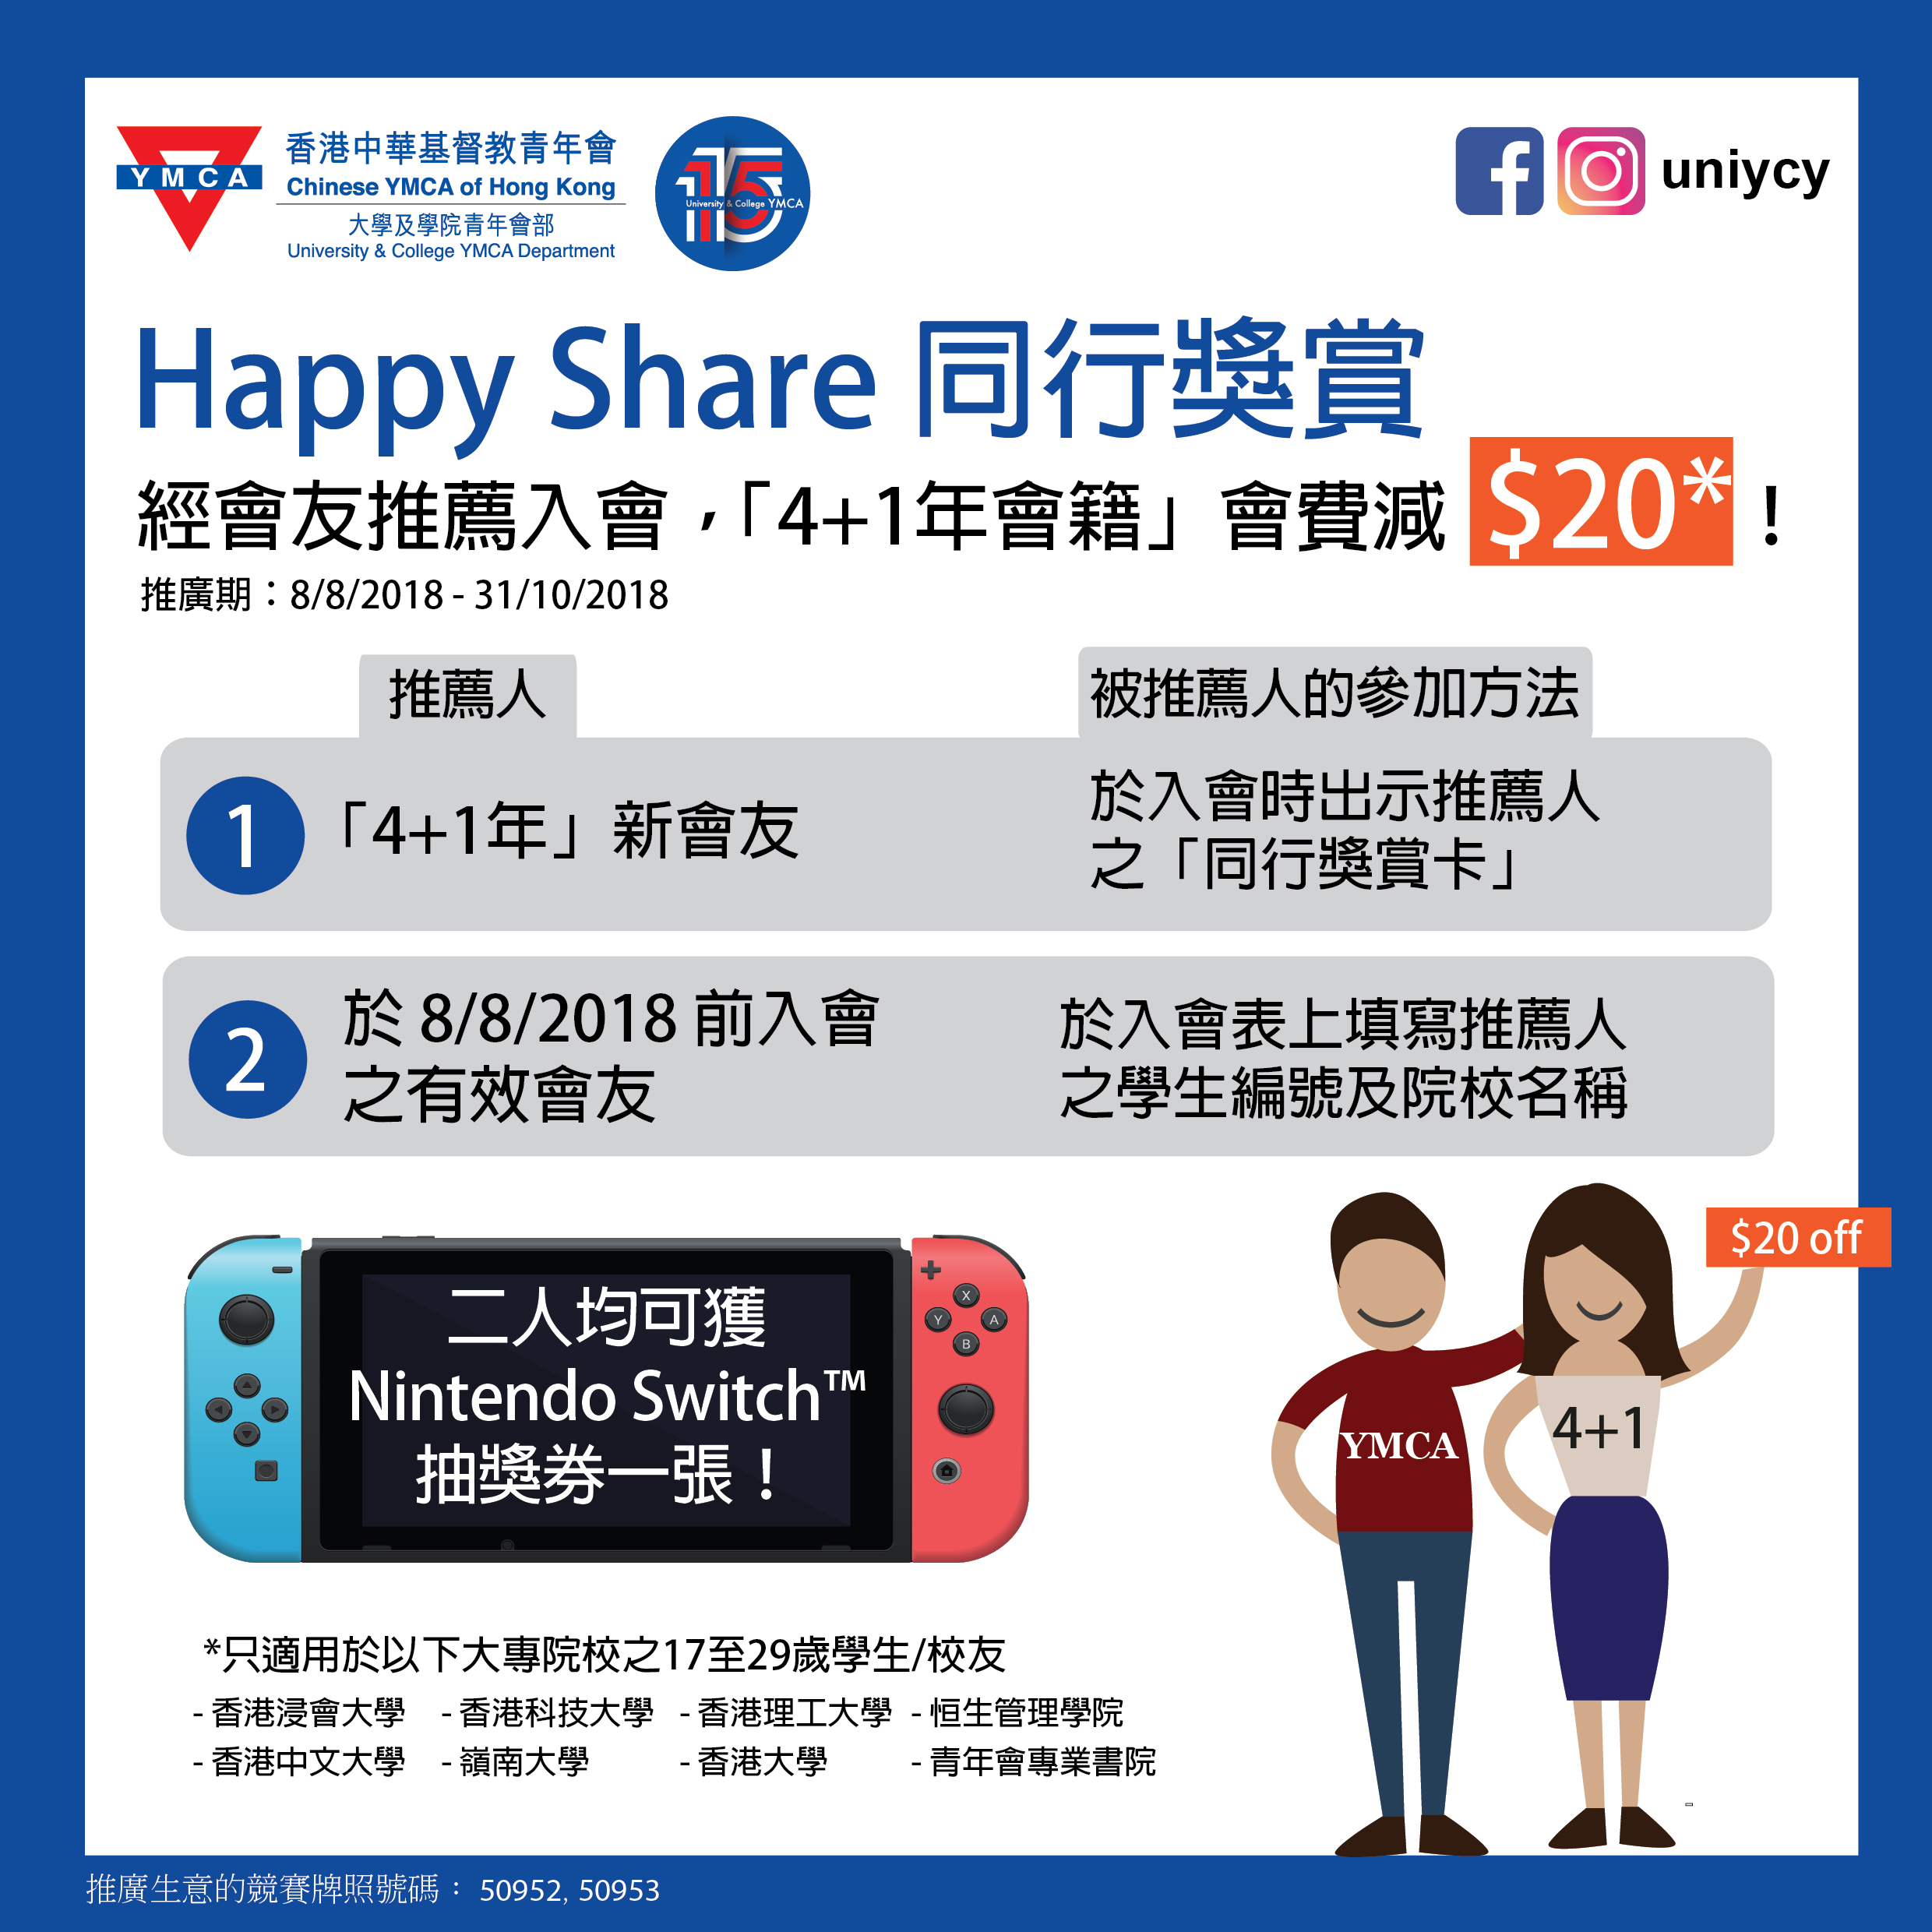 Happy Share Offer Details